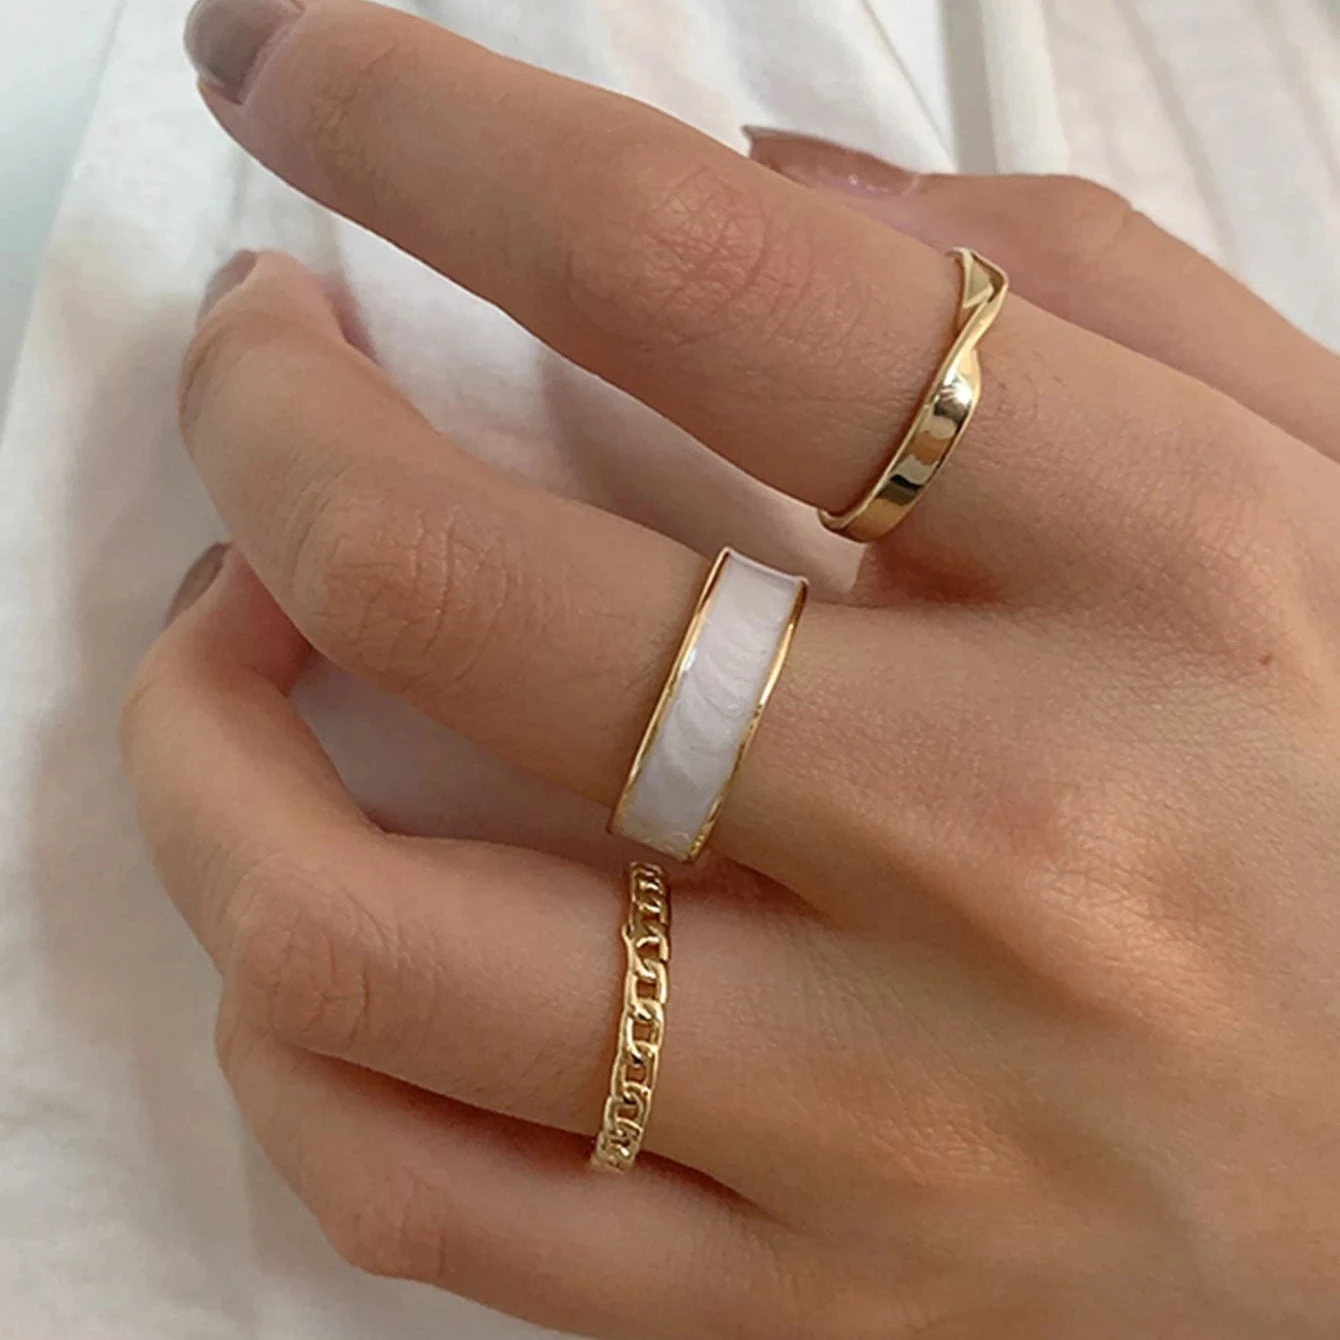 Fashion Simple Hiphop Trendy White Green Adjustable Open Finger Ring For Women unk Cool Resin Chain Rings Set Jewelry Girl Gift